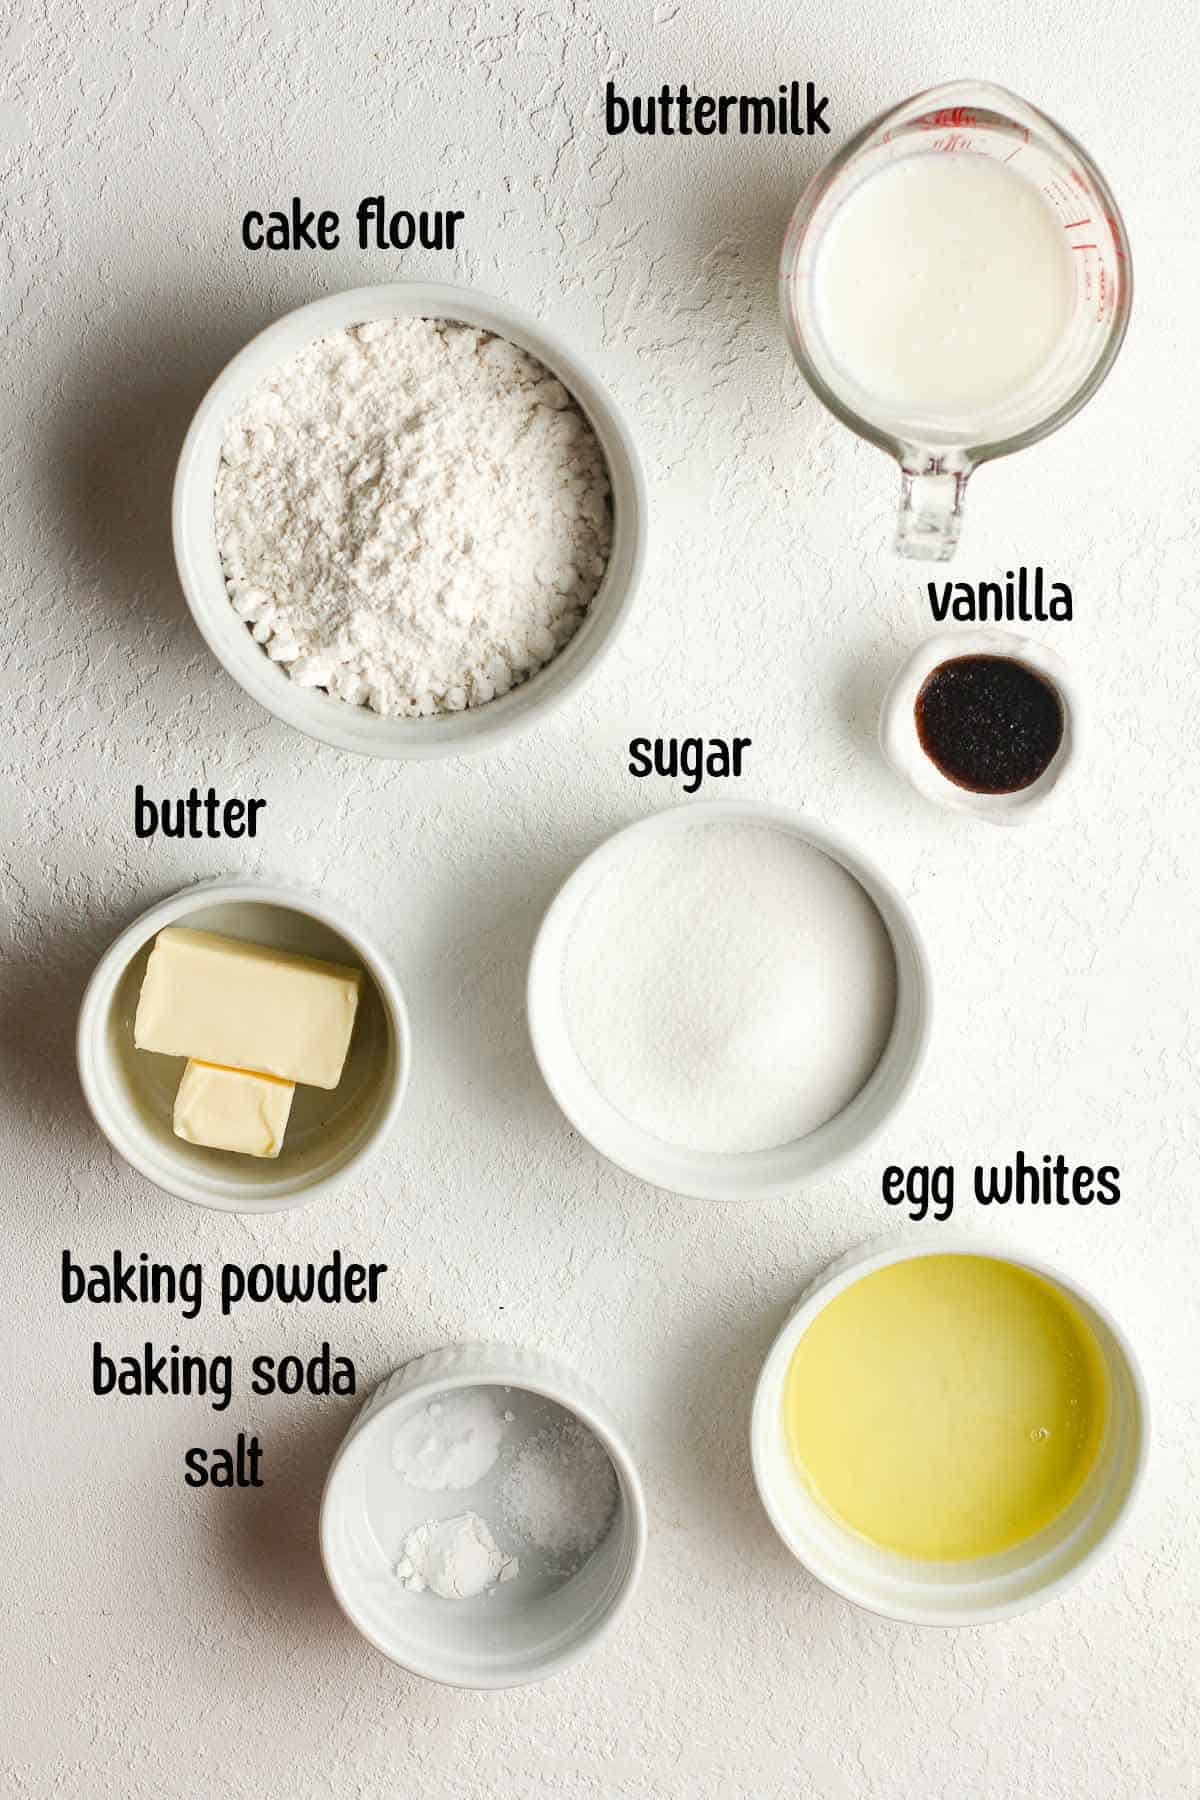 The ingredients for the vanilla cake for the shortcake recipe.